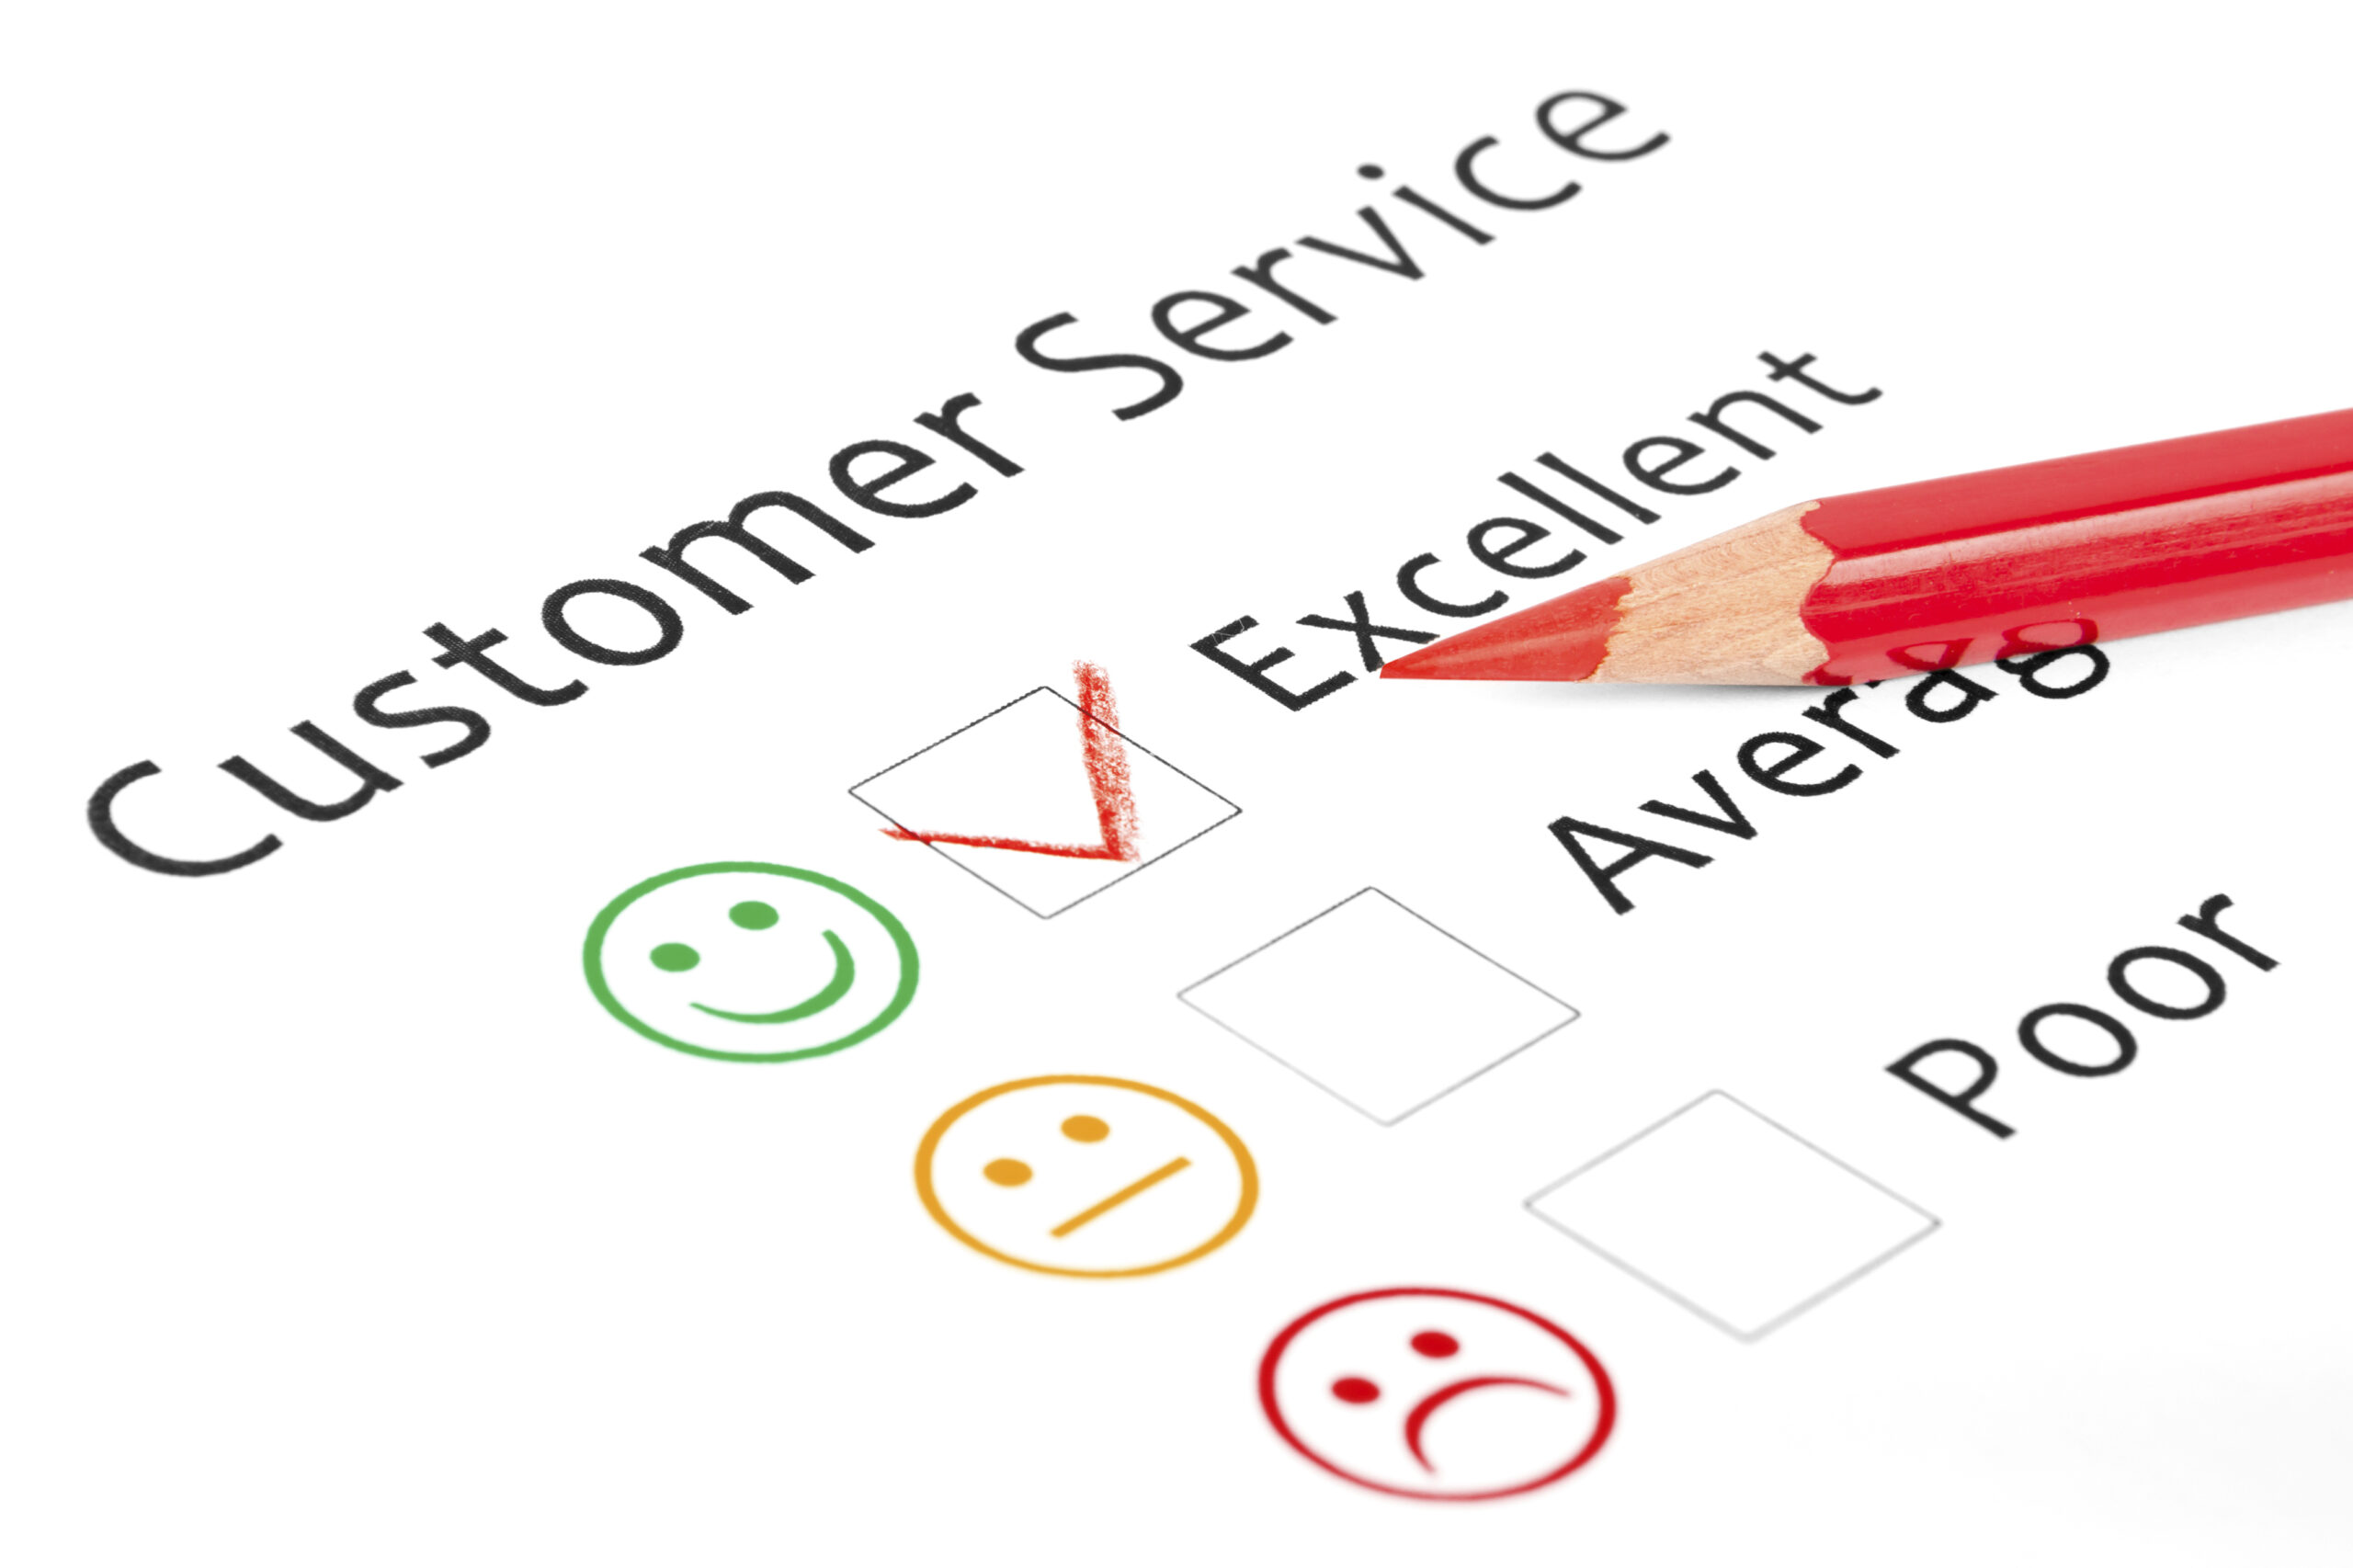 What does excellent customer service mean to you?